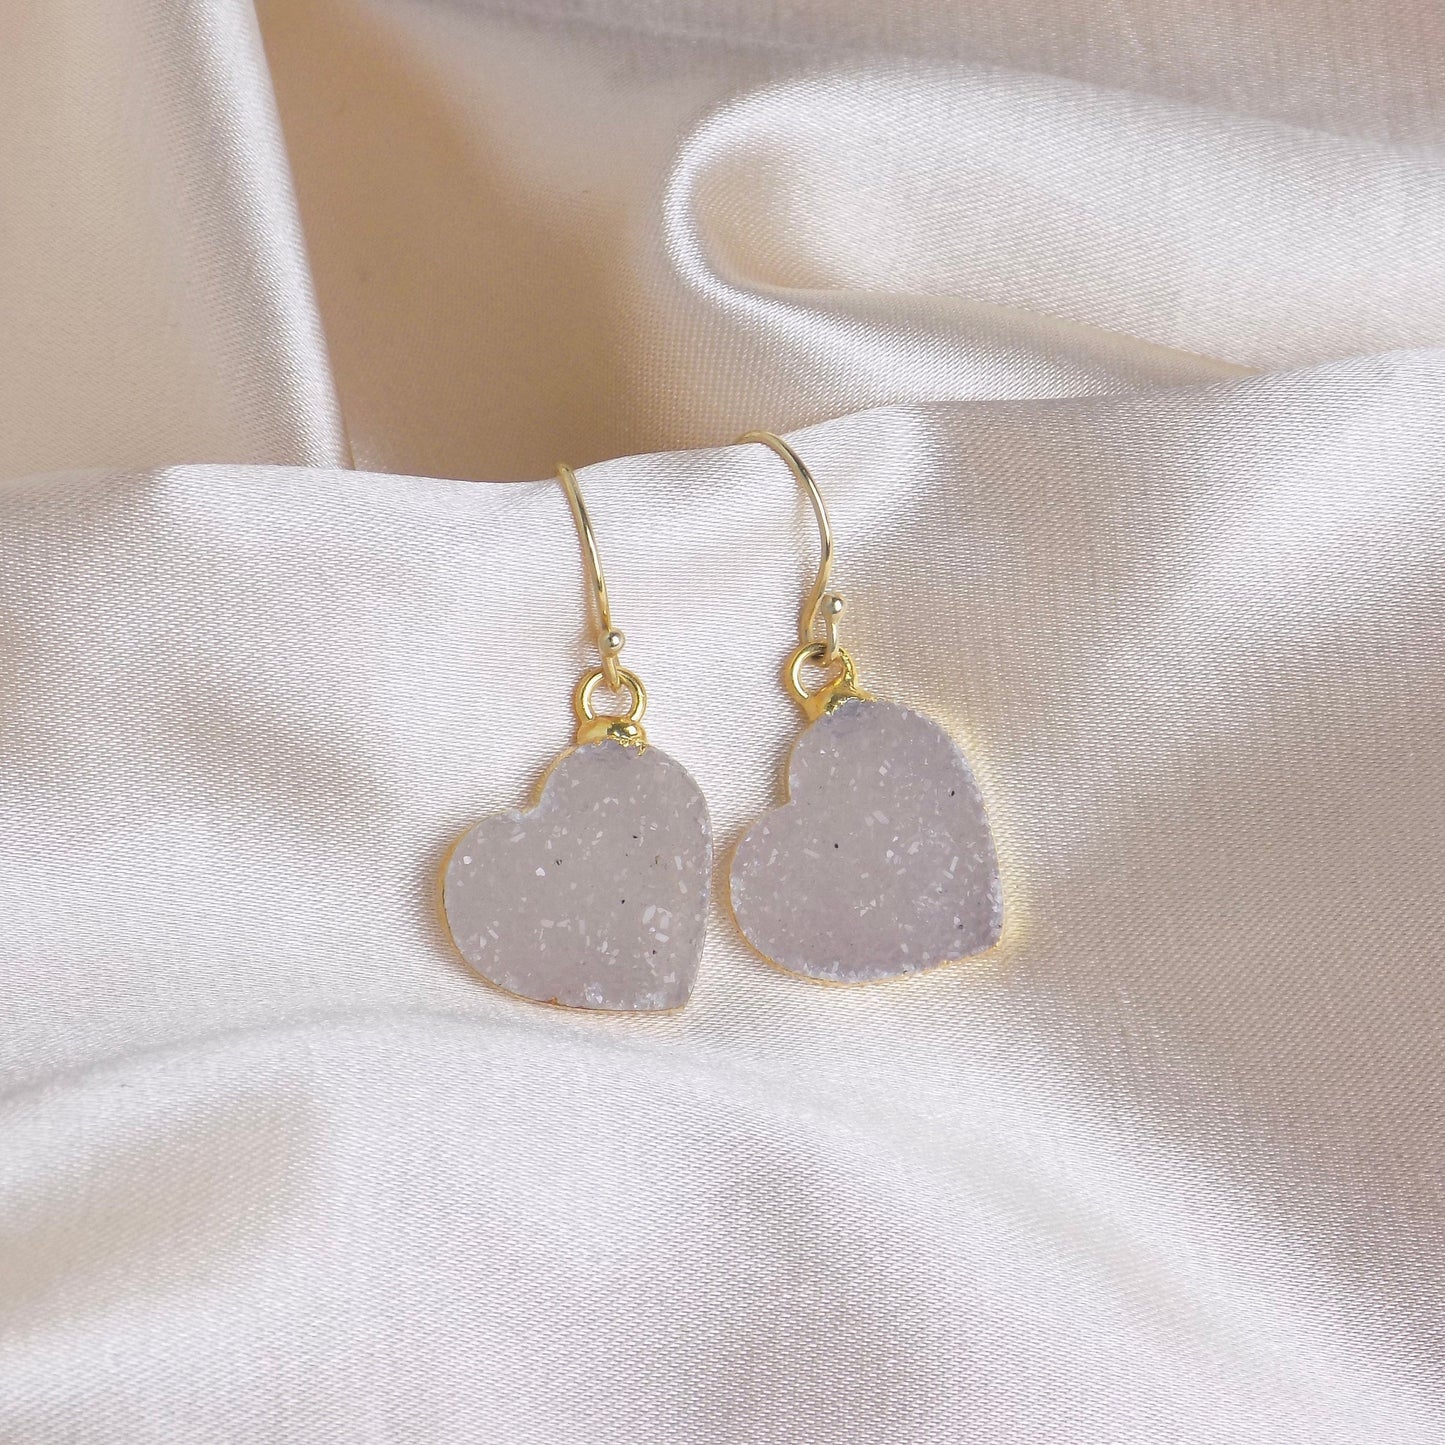 Small Heart Druzy Natural Gemstone Drop Earrings Gold, Sparkly Crystal, Gift For Women, M6-619